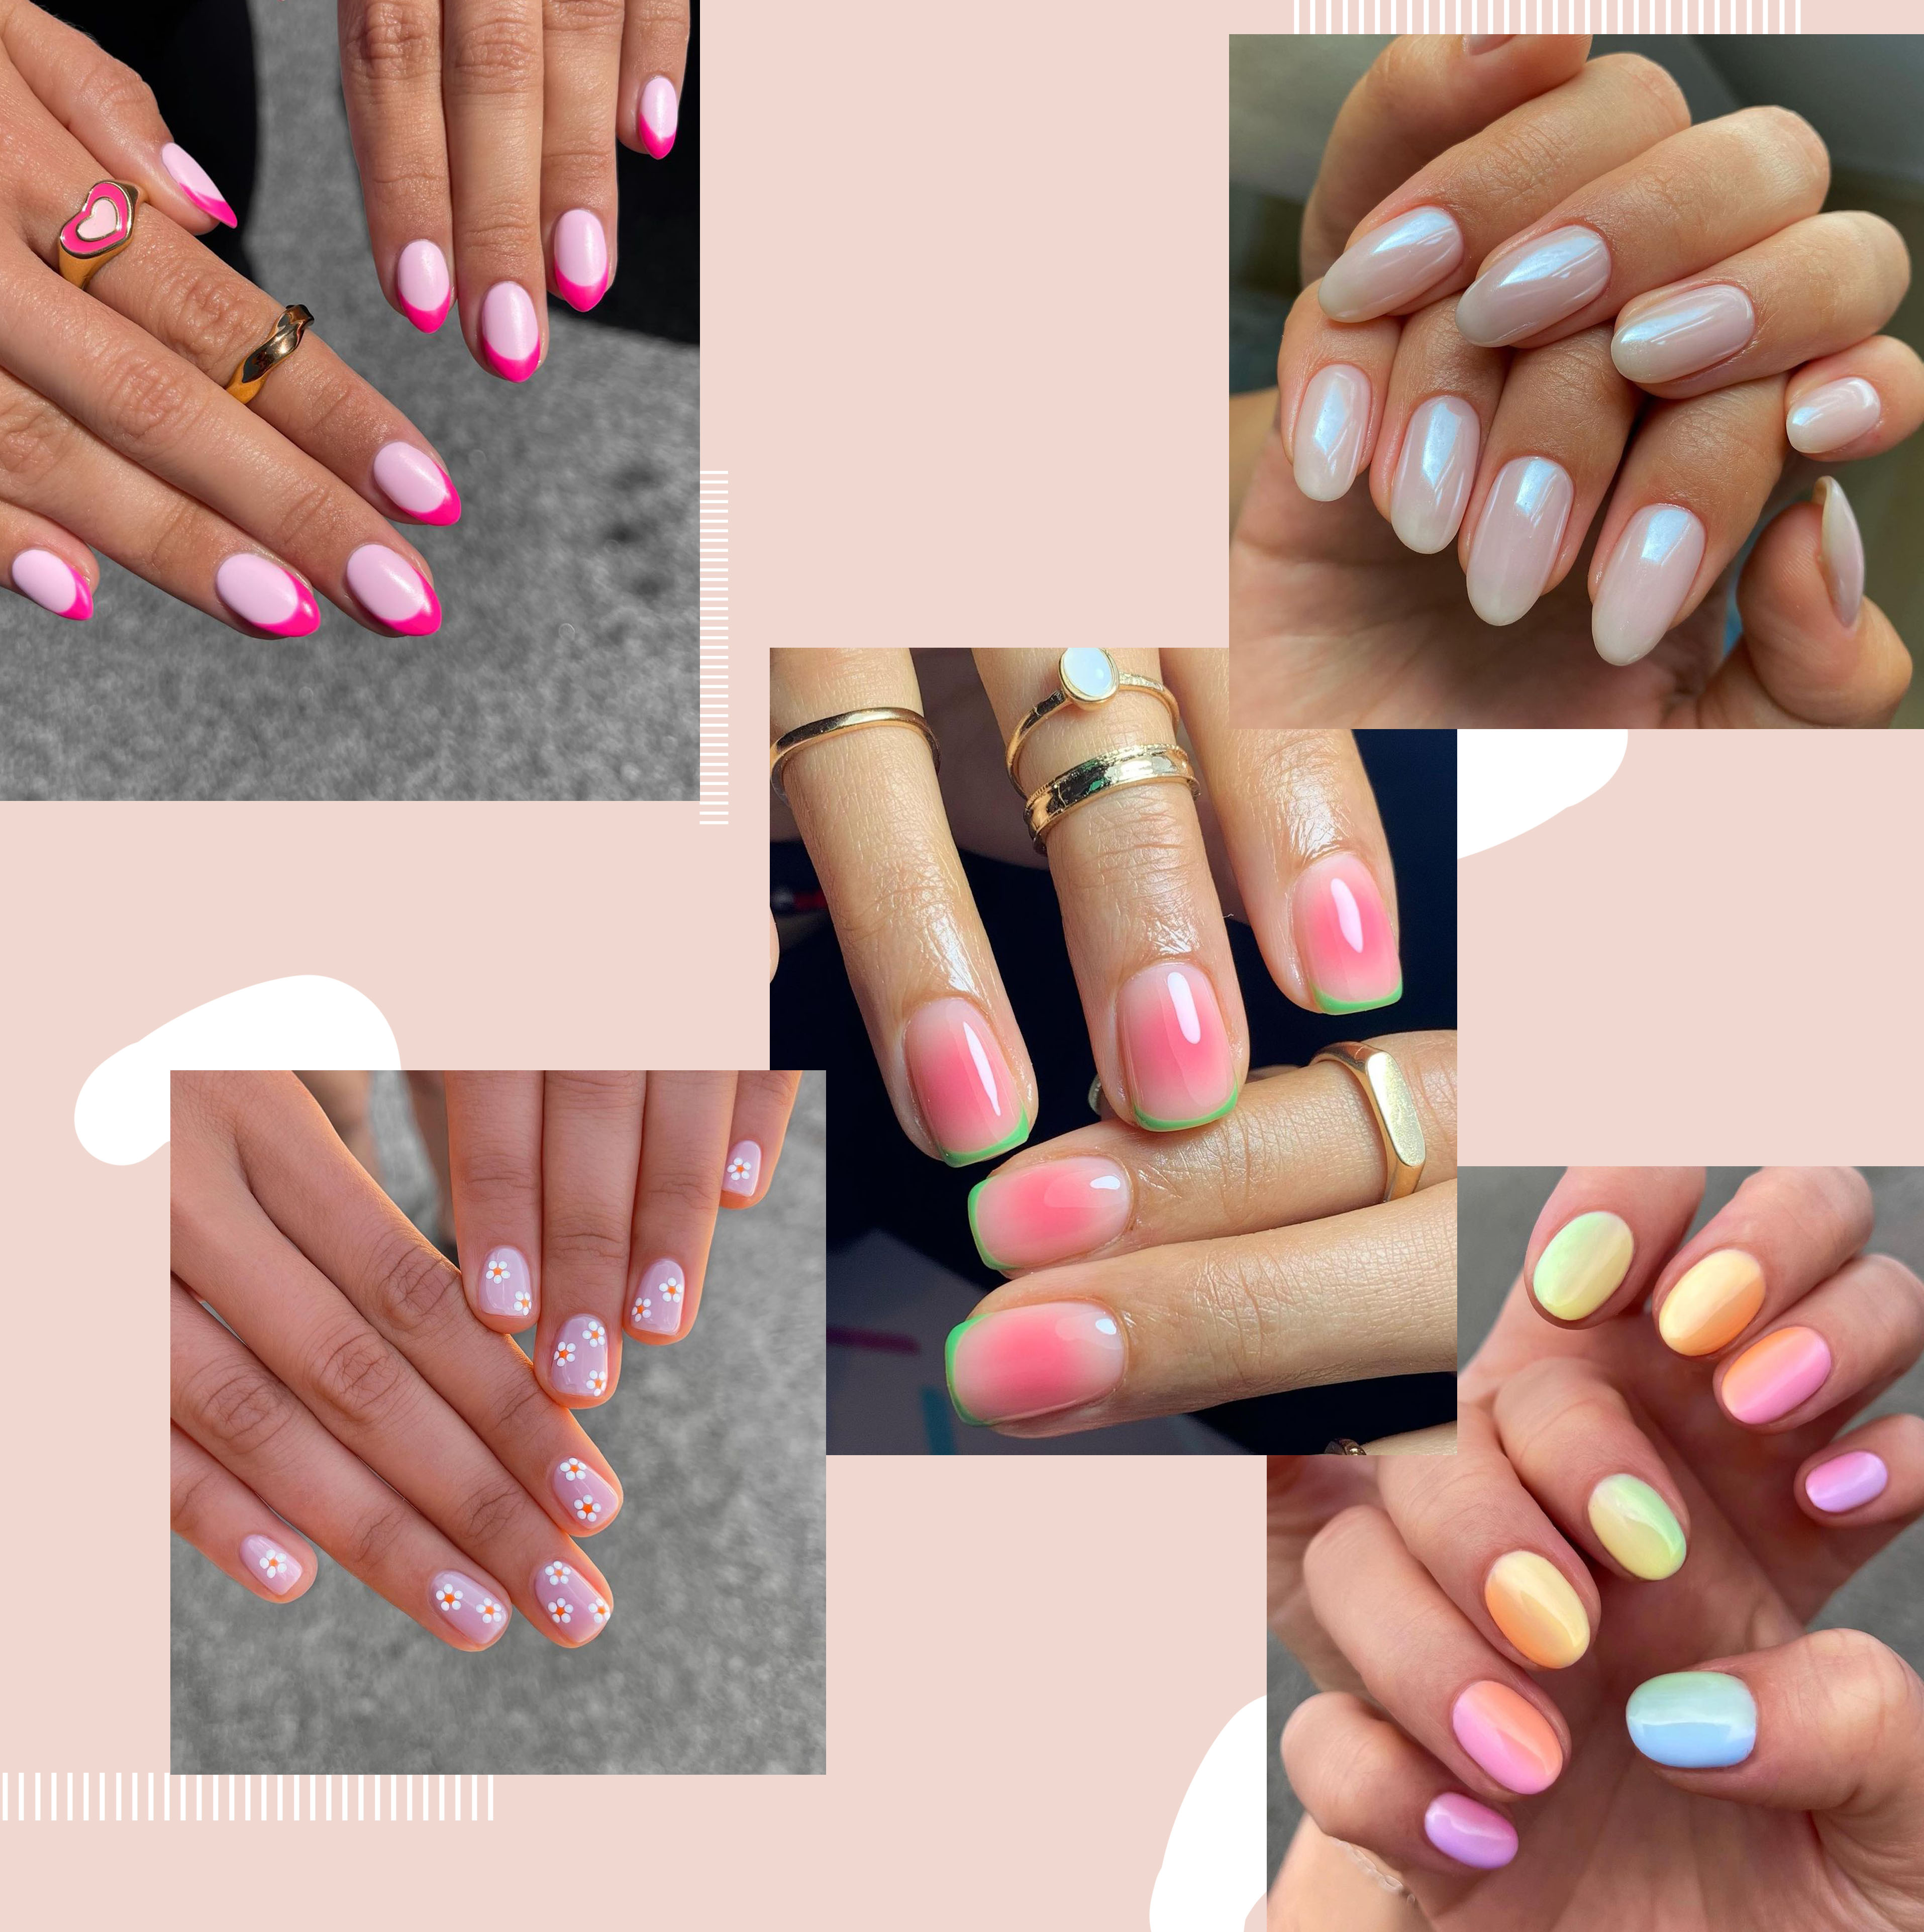 58 Cute Summer Nails Designs and Ideas to Brighten Up Any Look